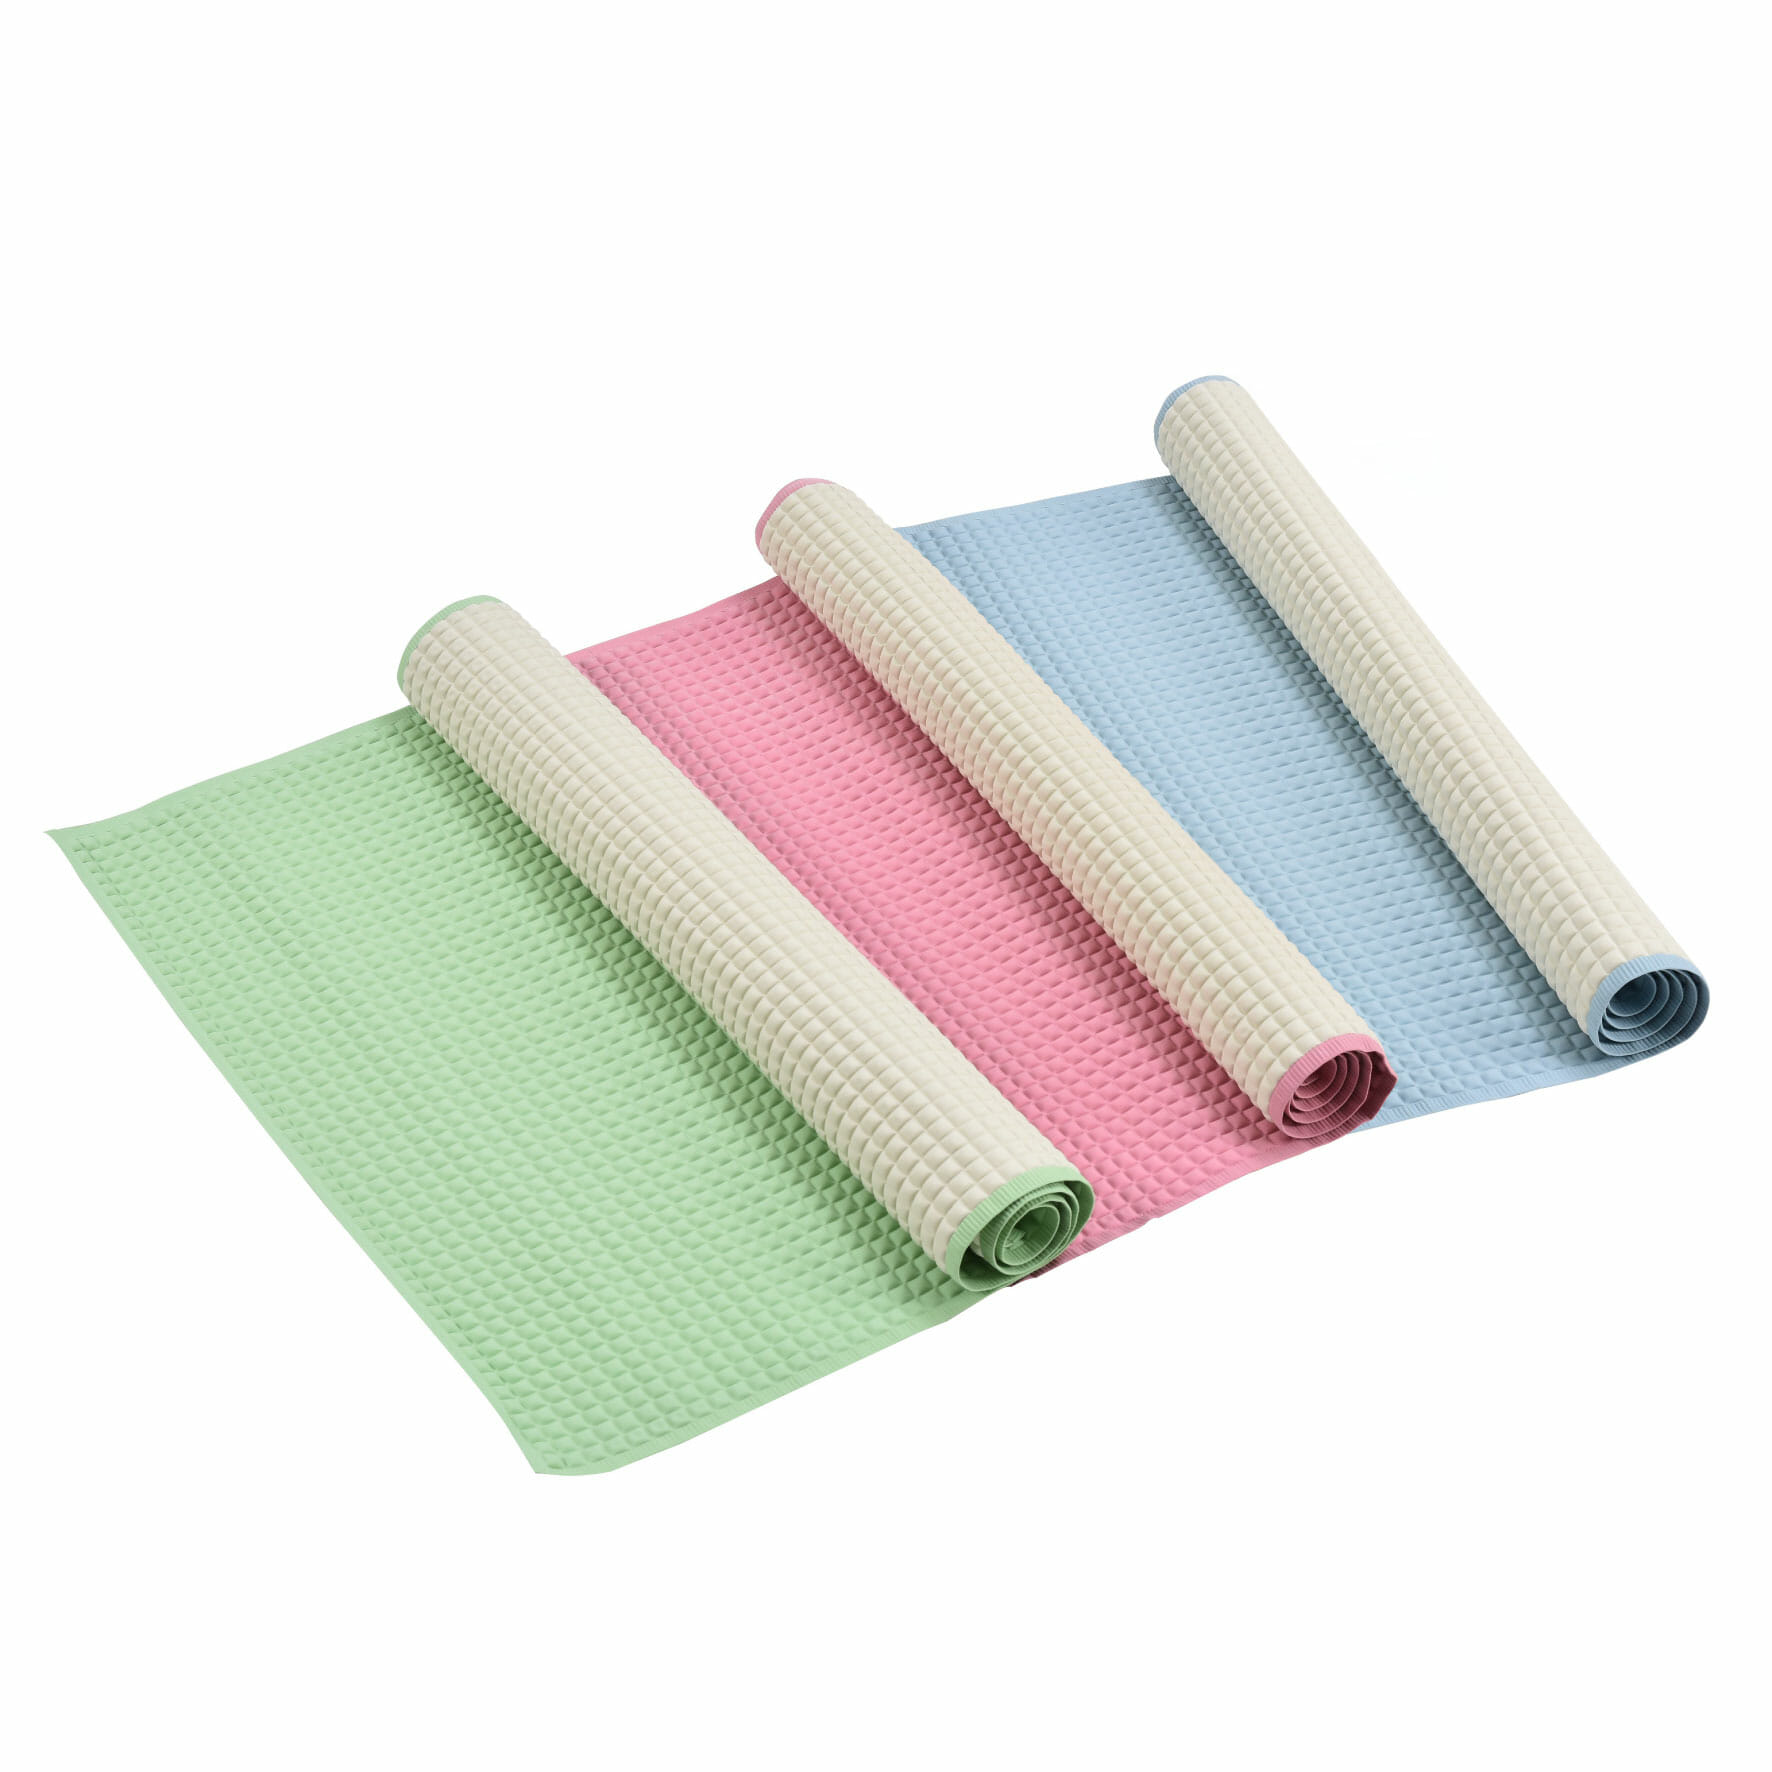 Babylove Premium Air-Filled Rubber Cot Sheet